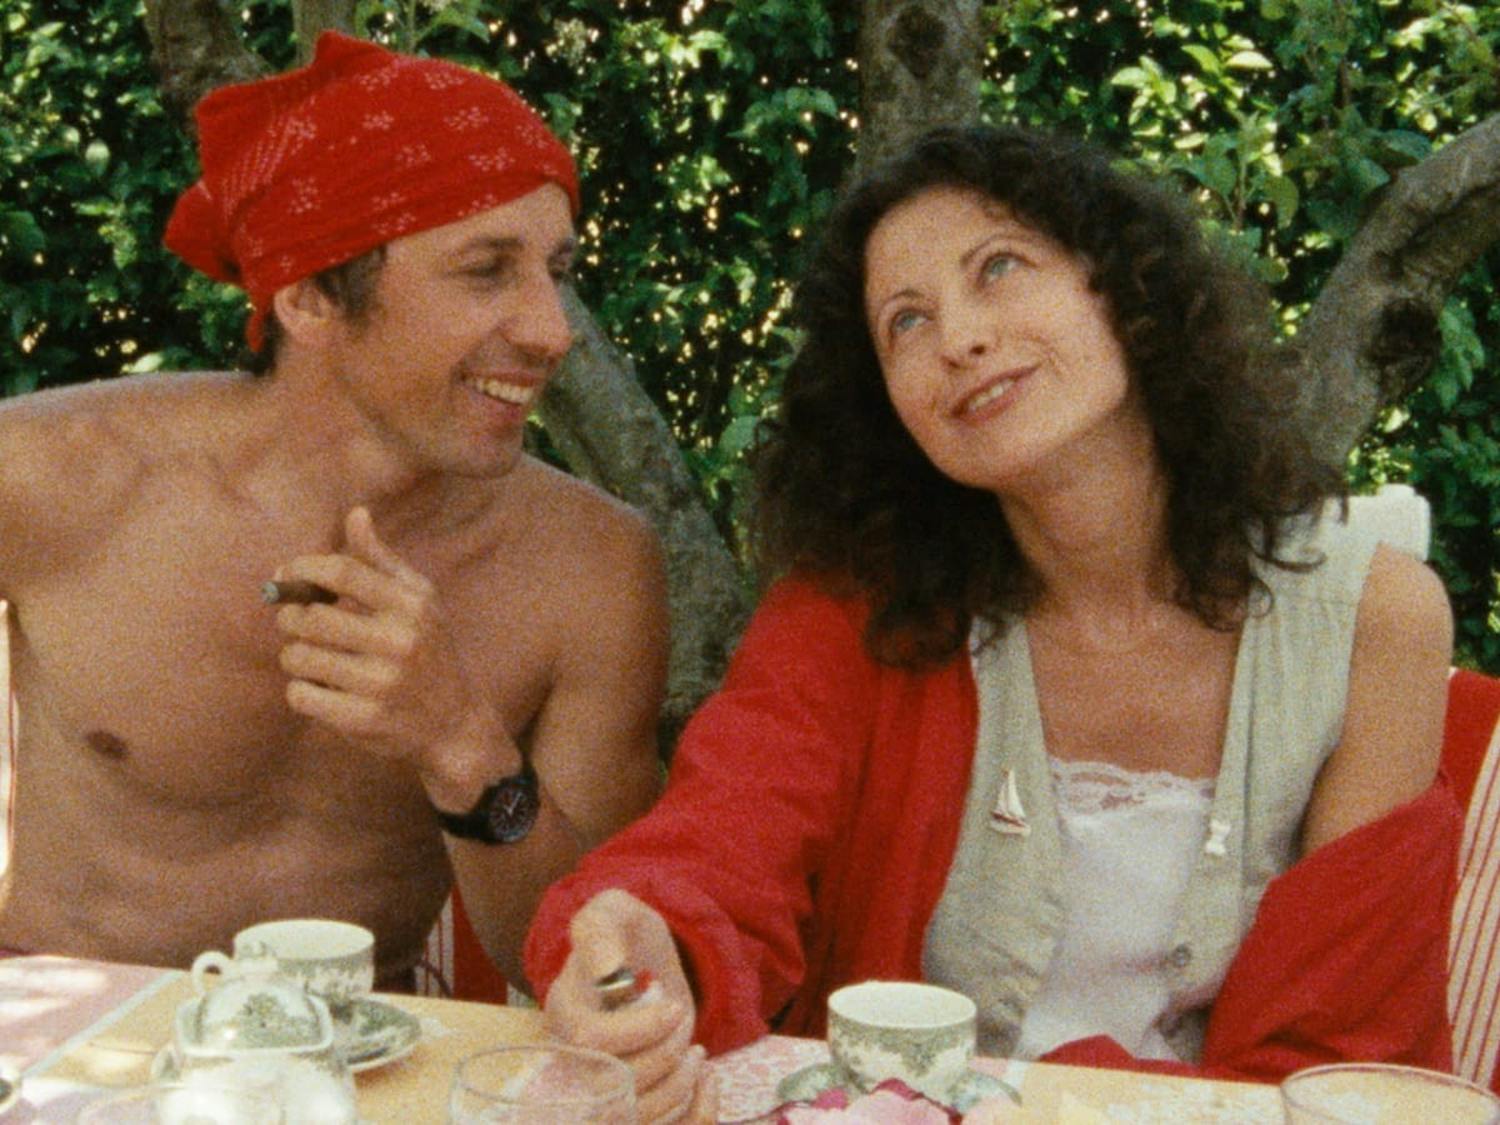 The sunny ennui of a summer spent in quarantine is reflected sublimely — and sadly — in Éric Rohmer’s film "Le Rayon Vert".